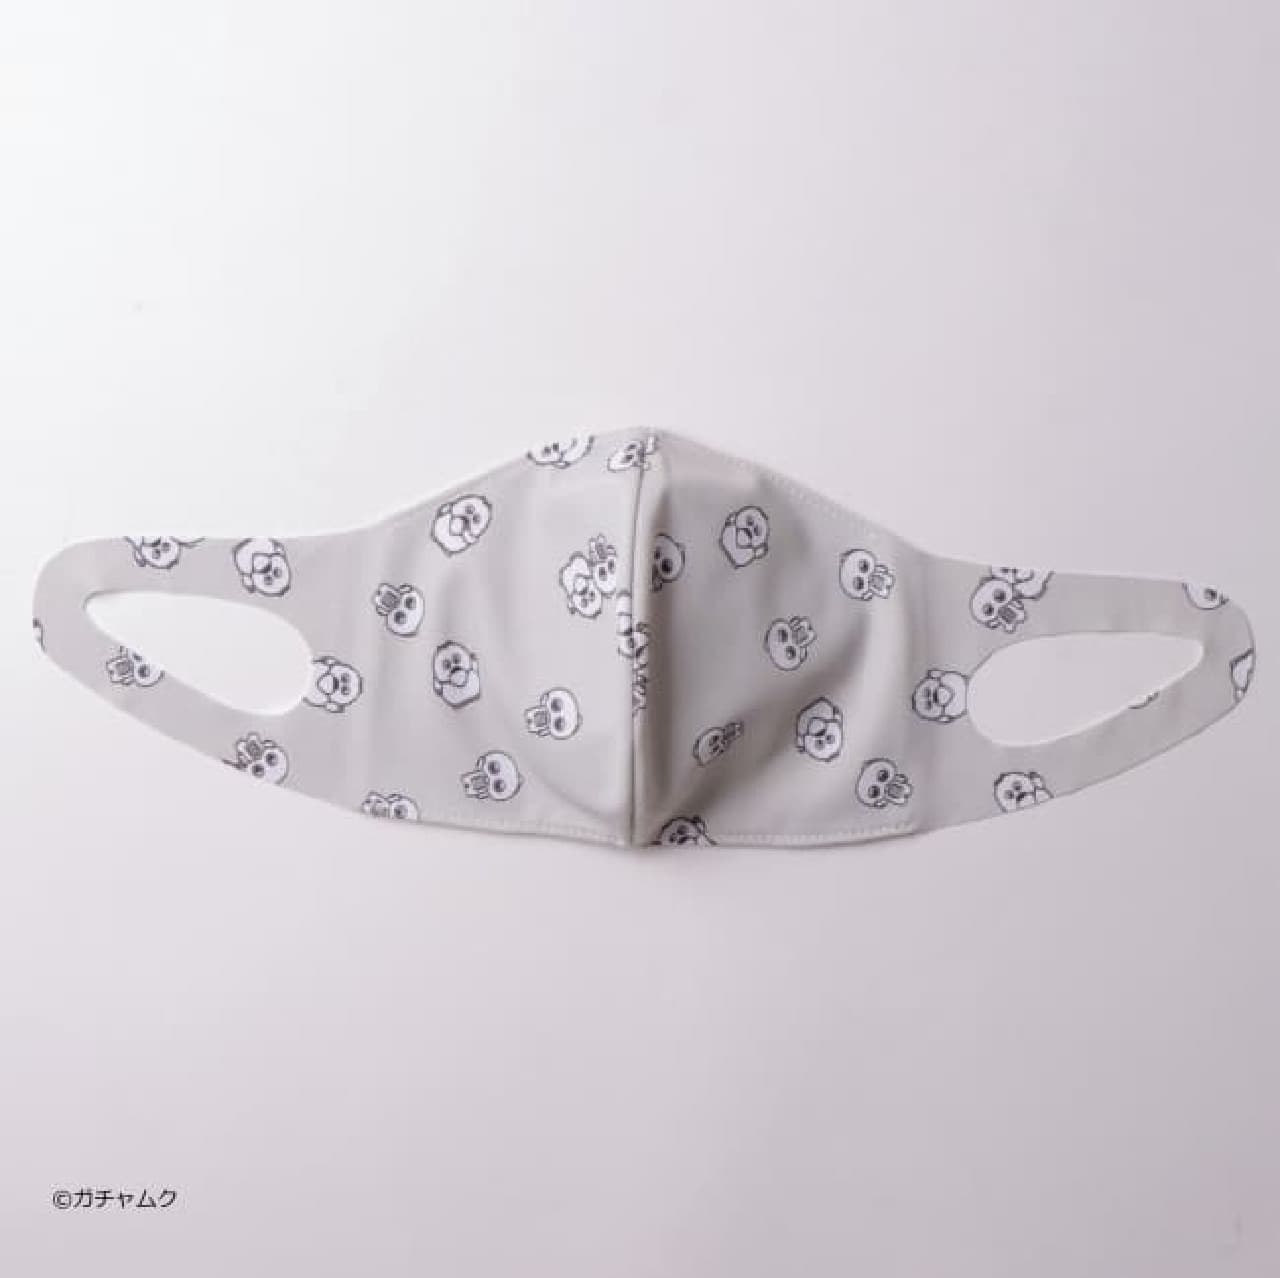 "Gachapin Mook" mask from Aeon Group Cox